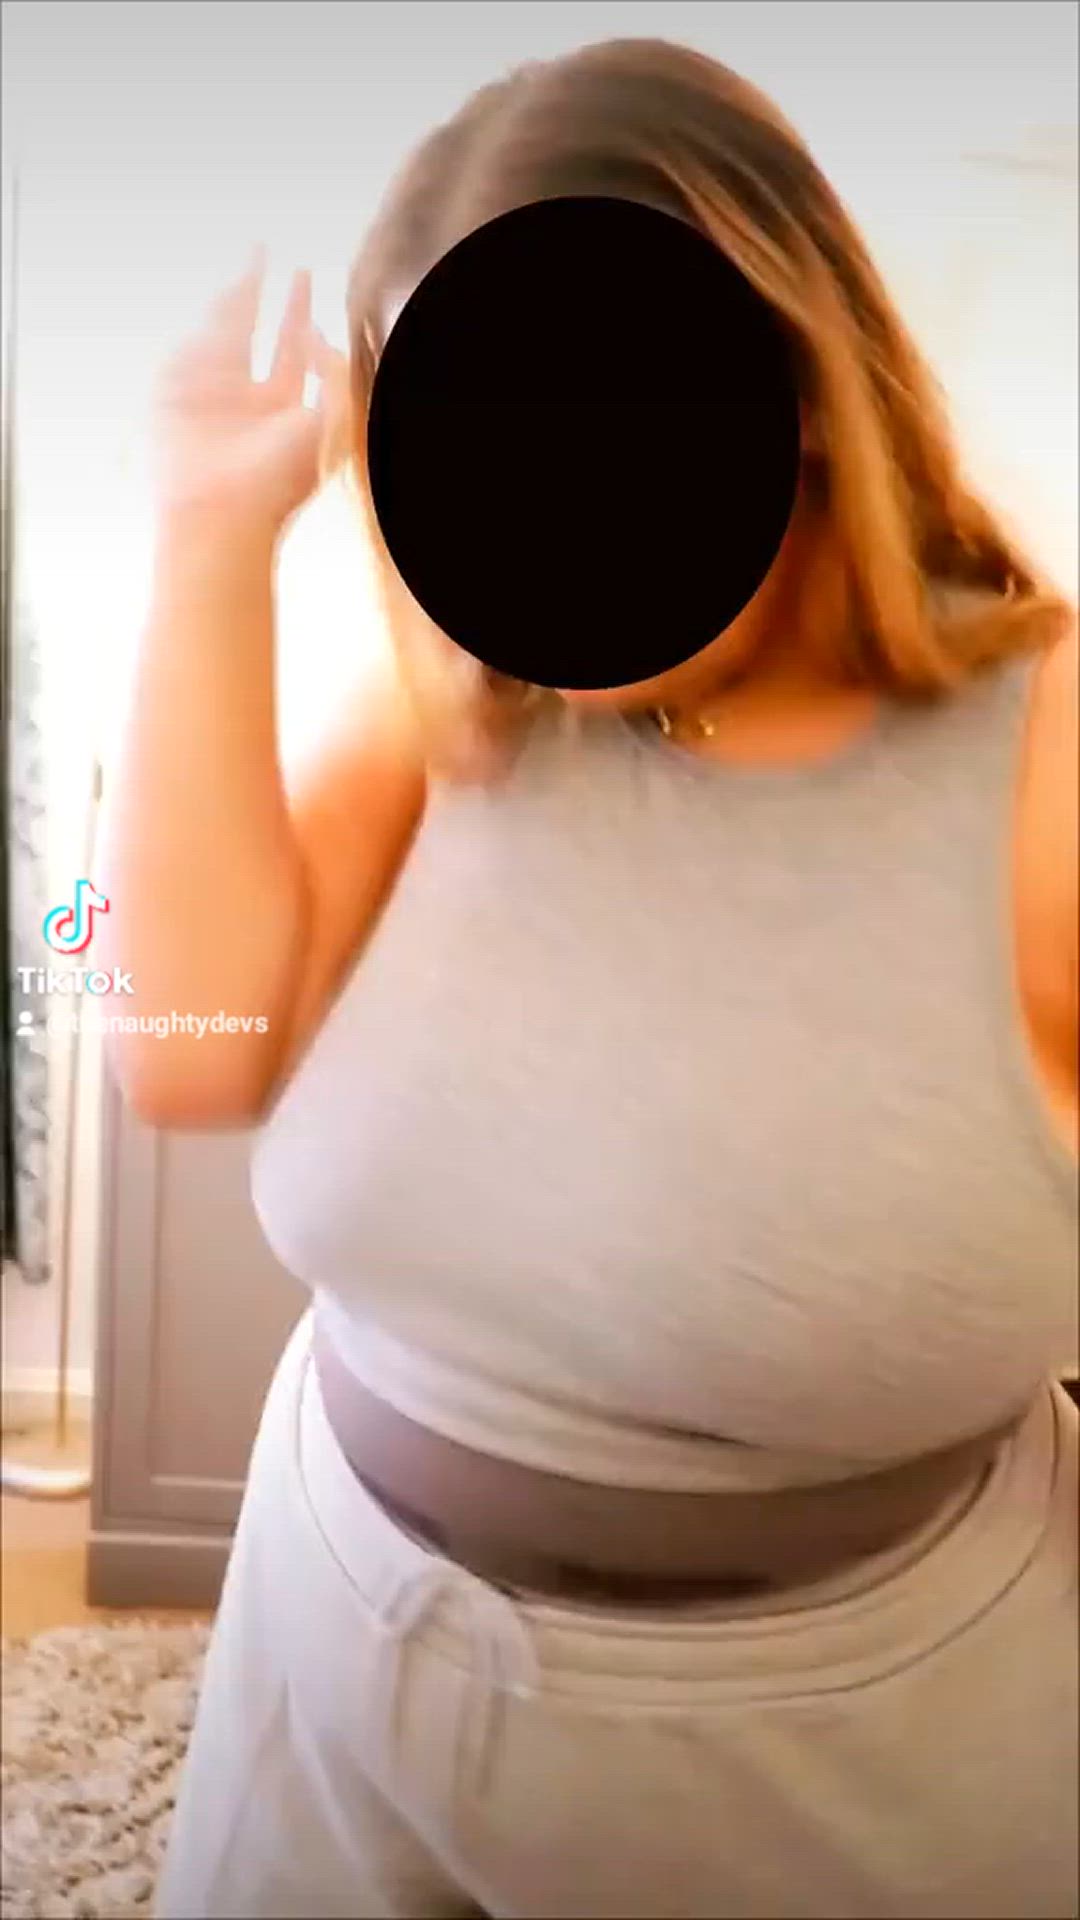 Hotwife porn video with onlyfans model devsandthecity <strong>@devsandthecity</strong>